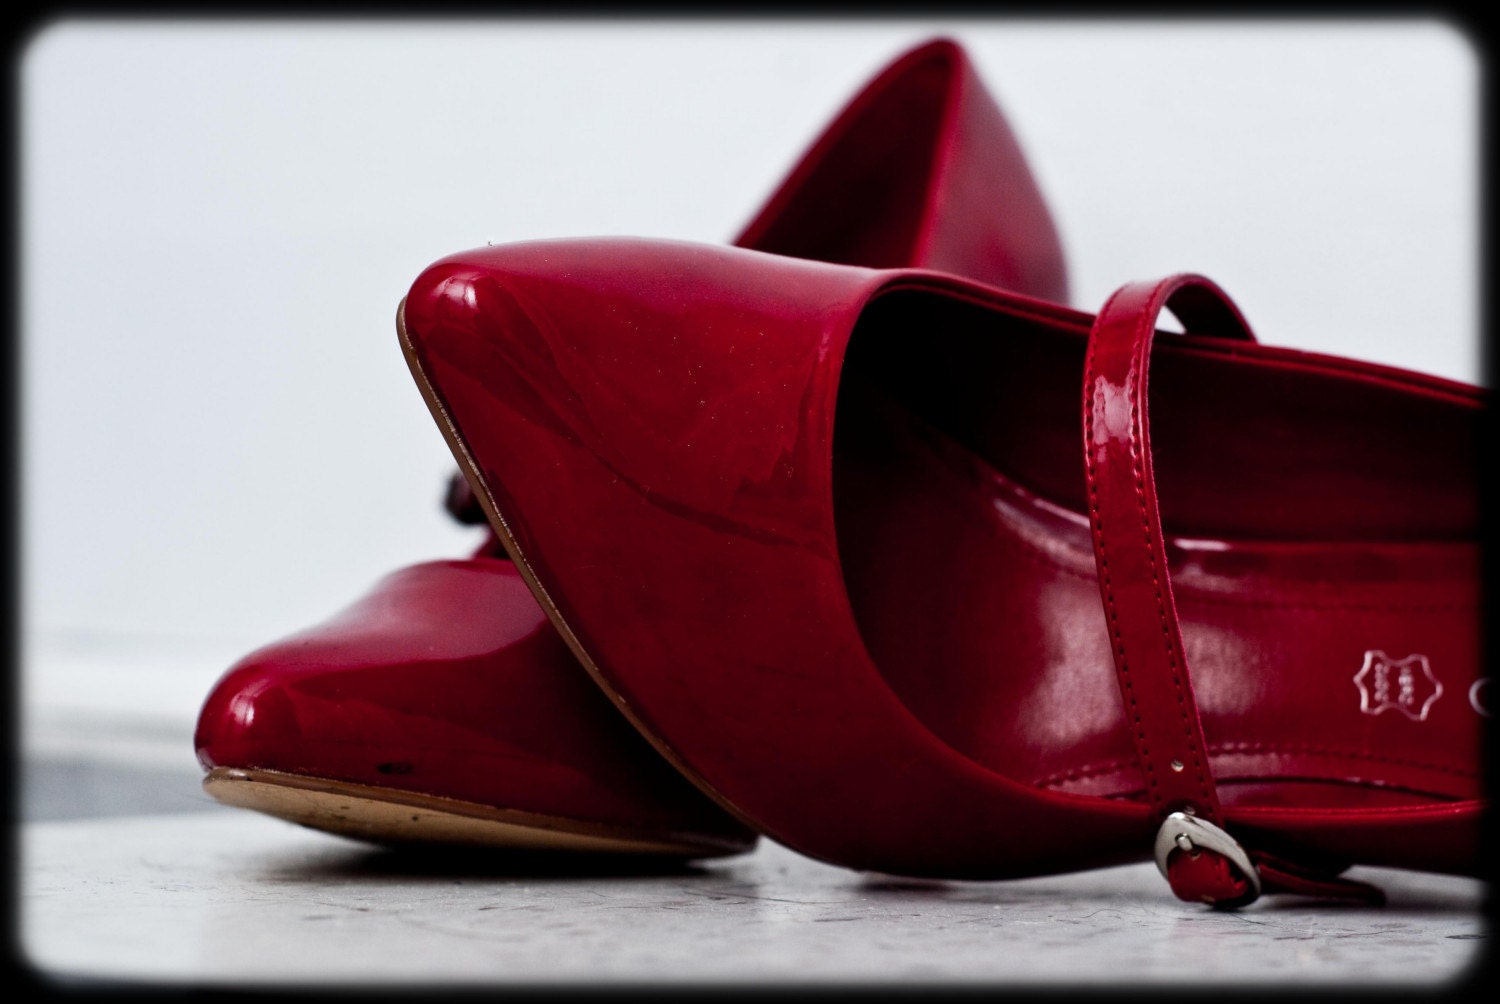 Red Shoes - 8x10 print - GeekgirlyPhotography